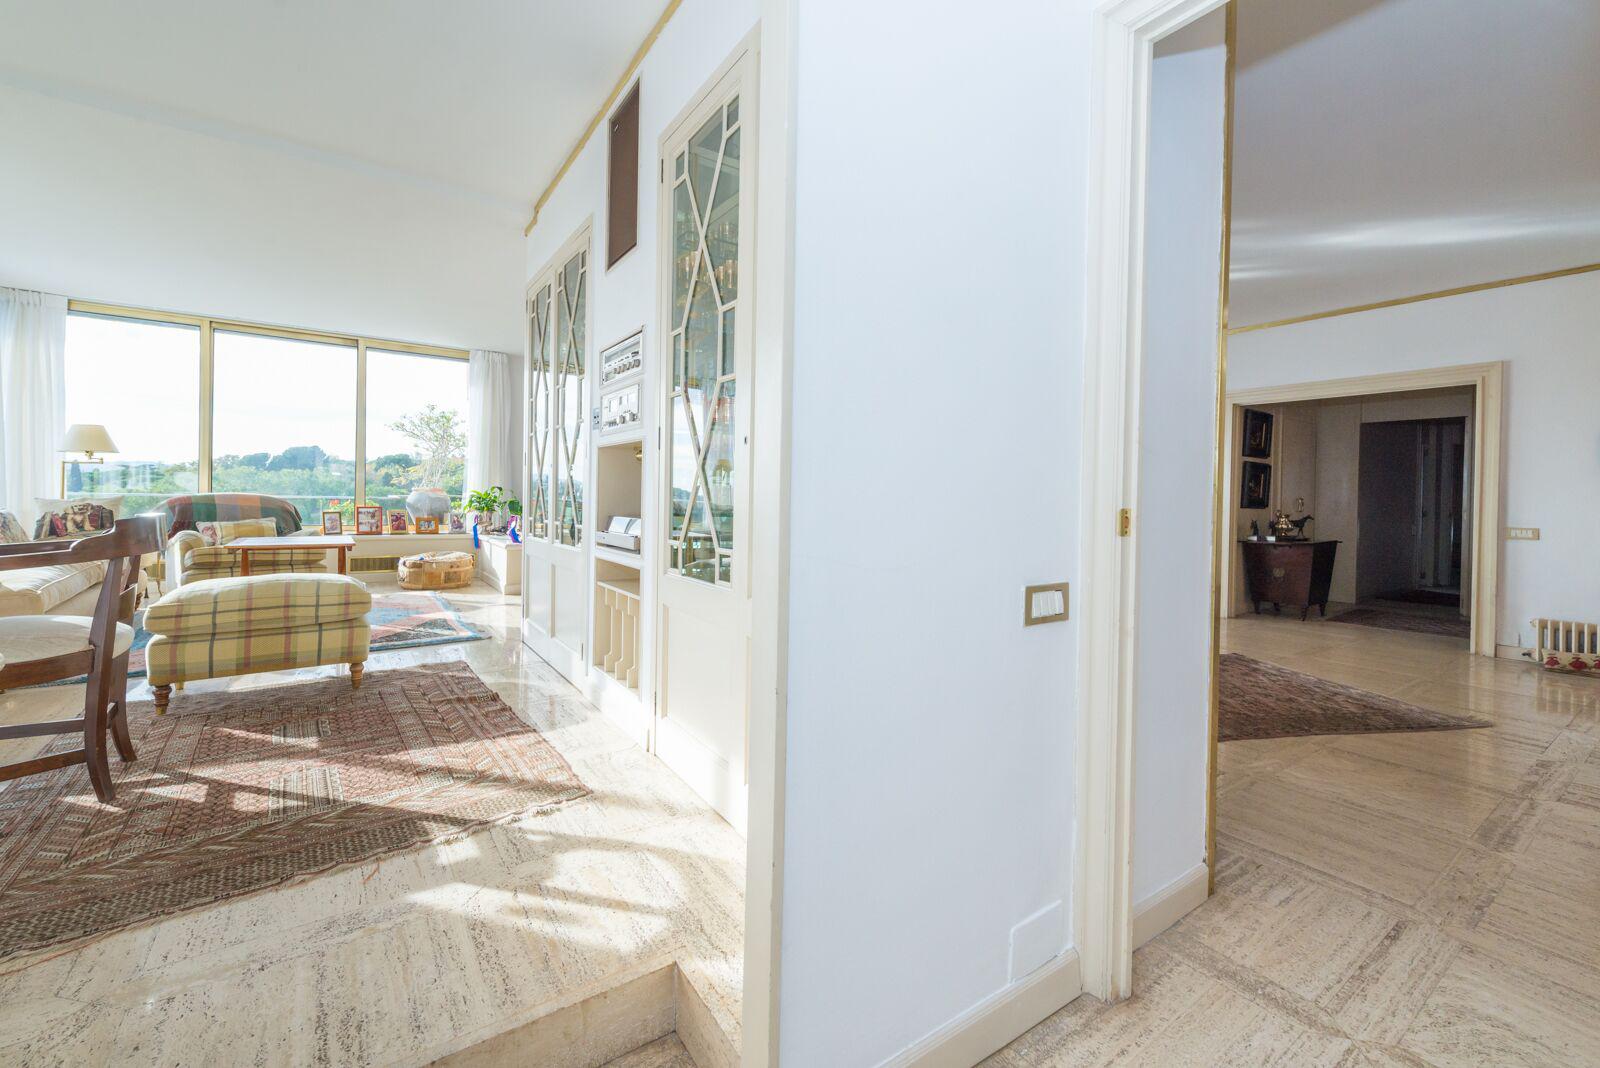 80454 Flat for sale in Les Corts, Pedralbes 13